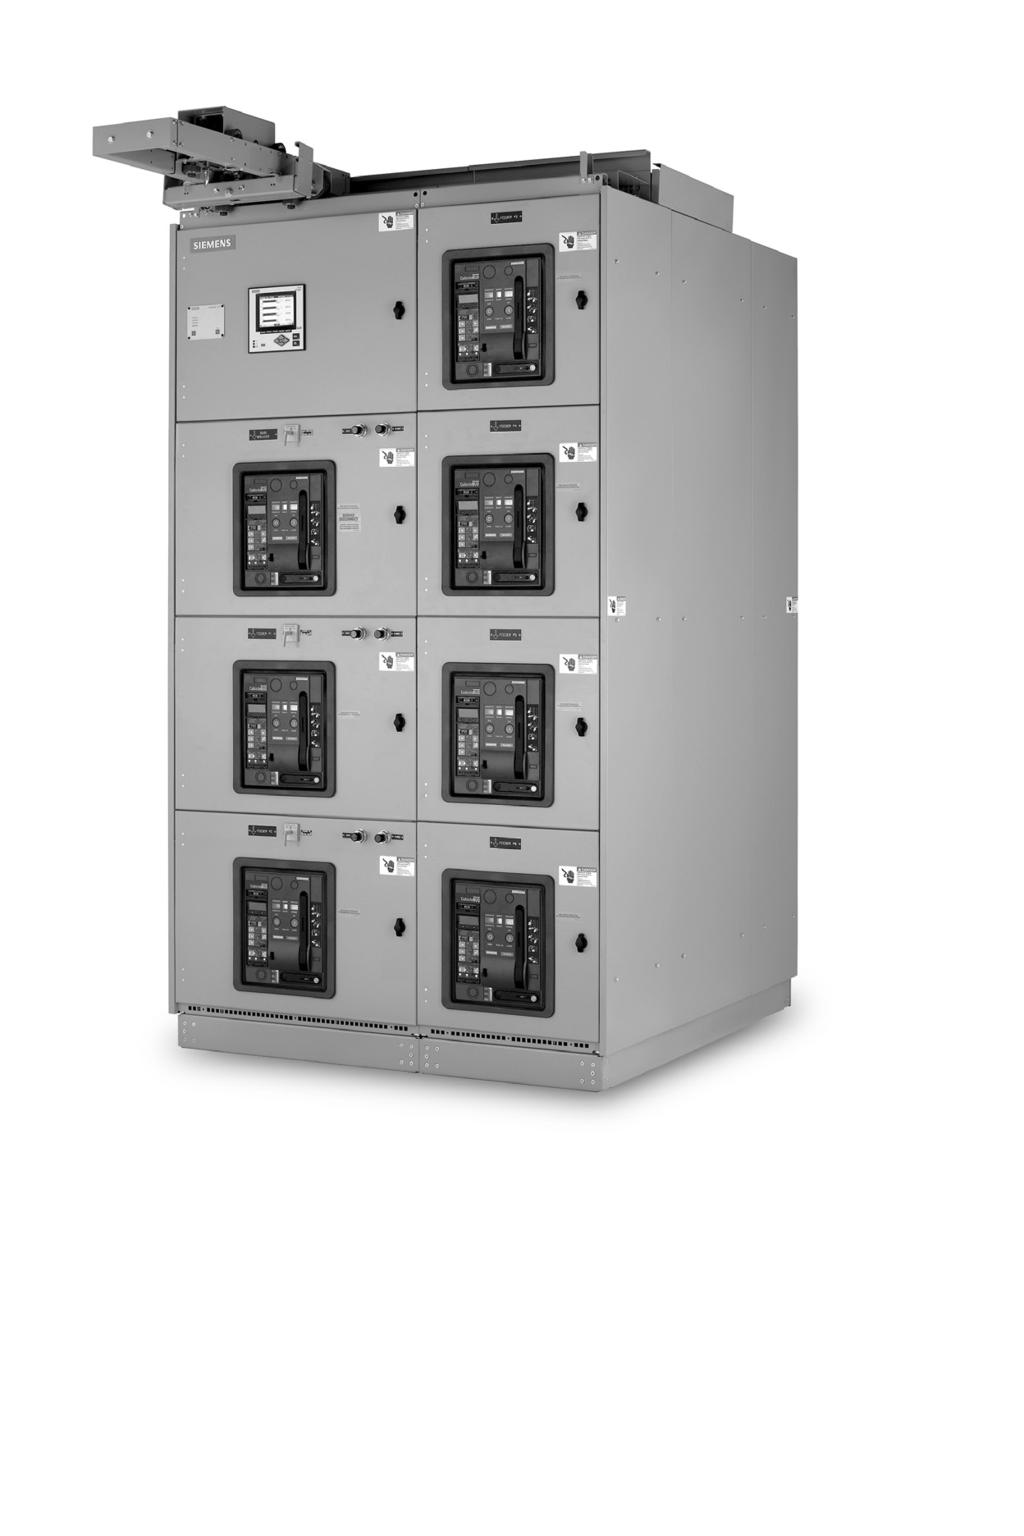 General Description Scope These instructions cover the installation, operation and maintenance of Siemens type WL metal-enclosed low voltage switchgear assemblies, using Type WL low voltage power